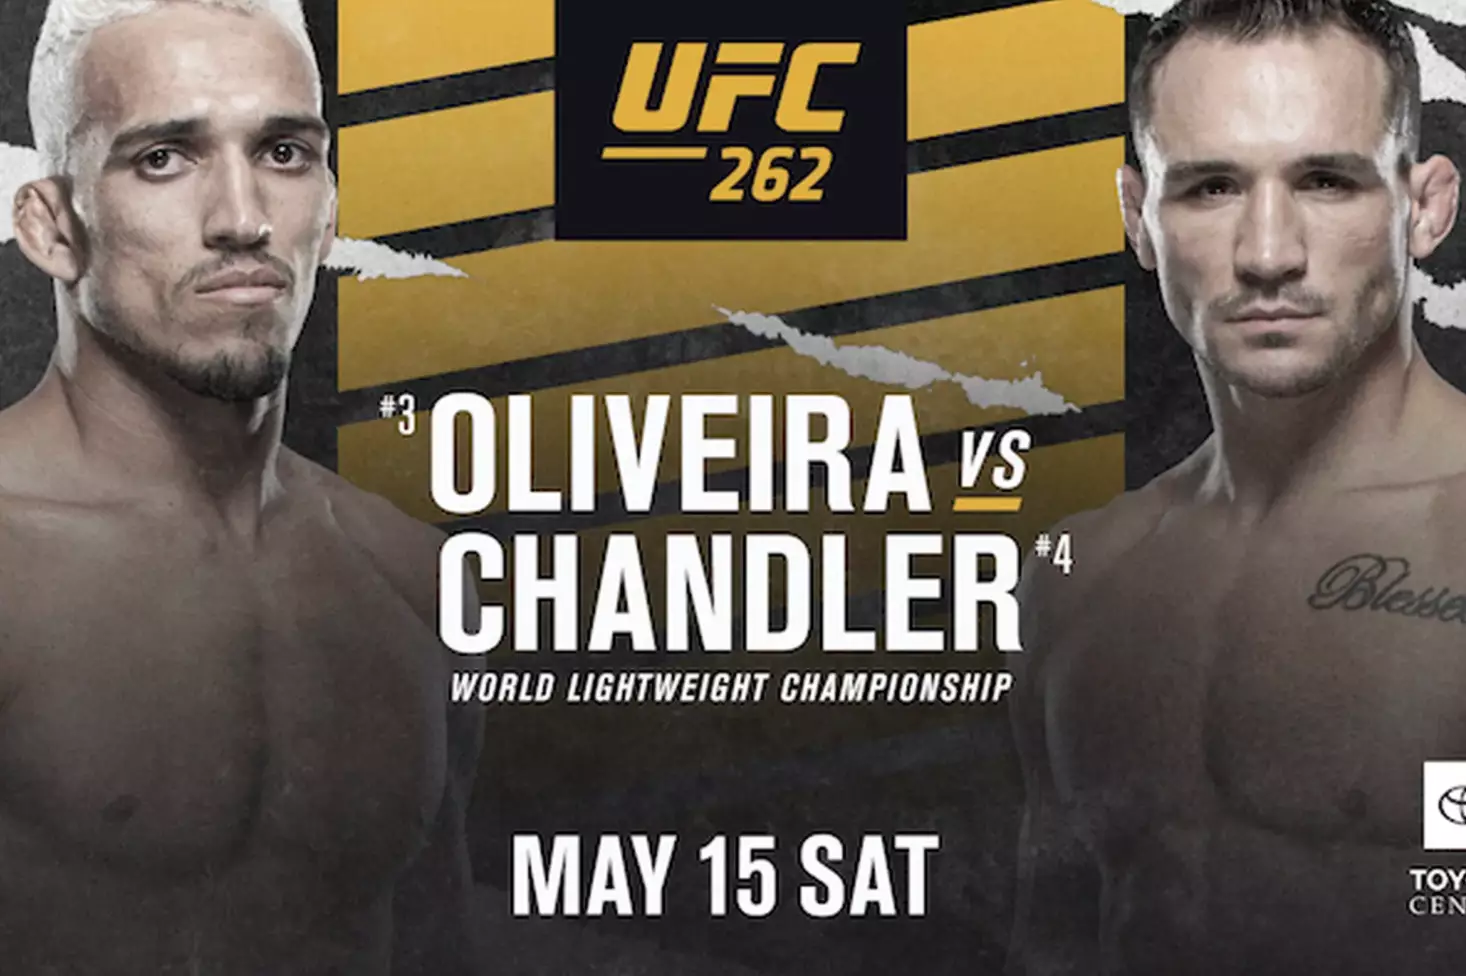 UFC 262: Oliveira Vs Chandler UK Time, Fight Card, Stream And Predictions